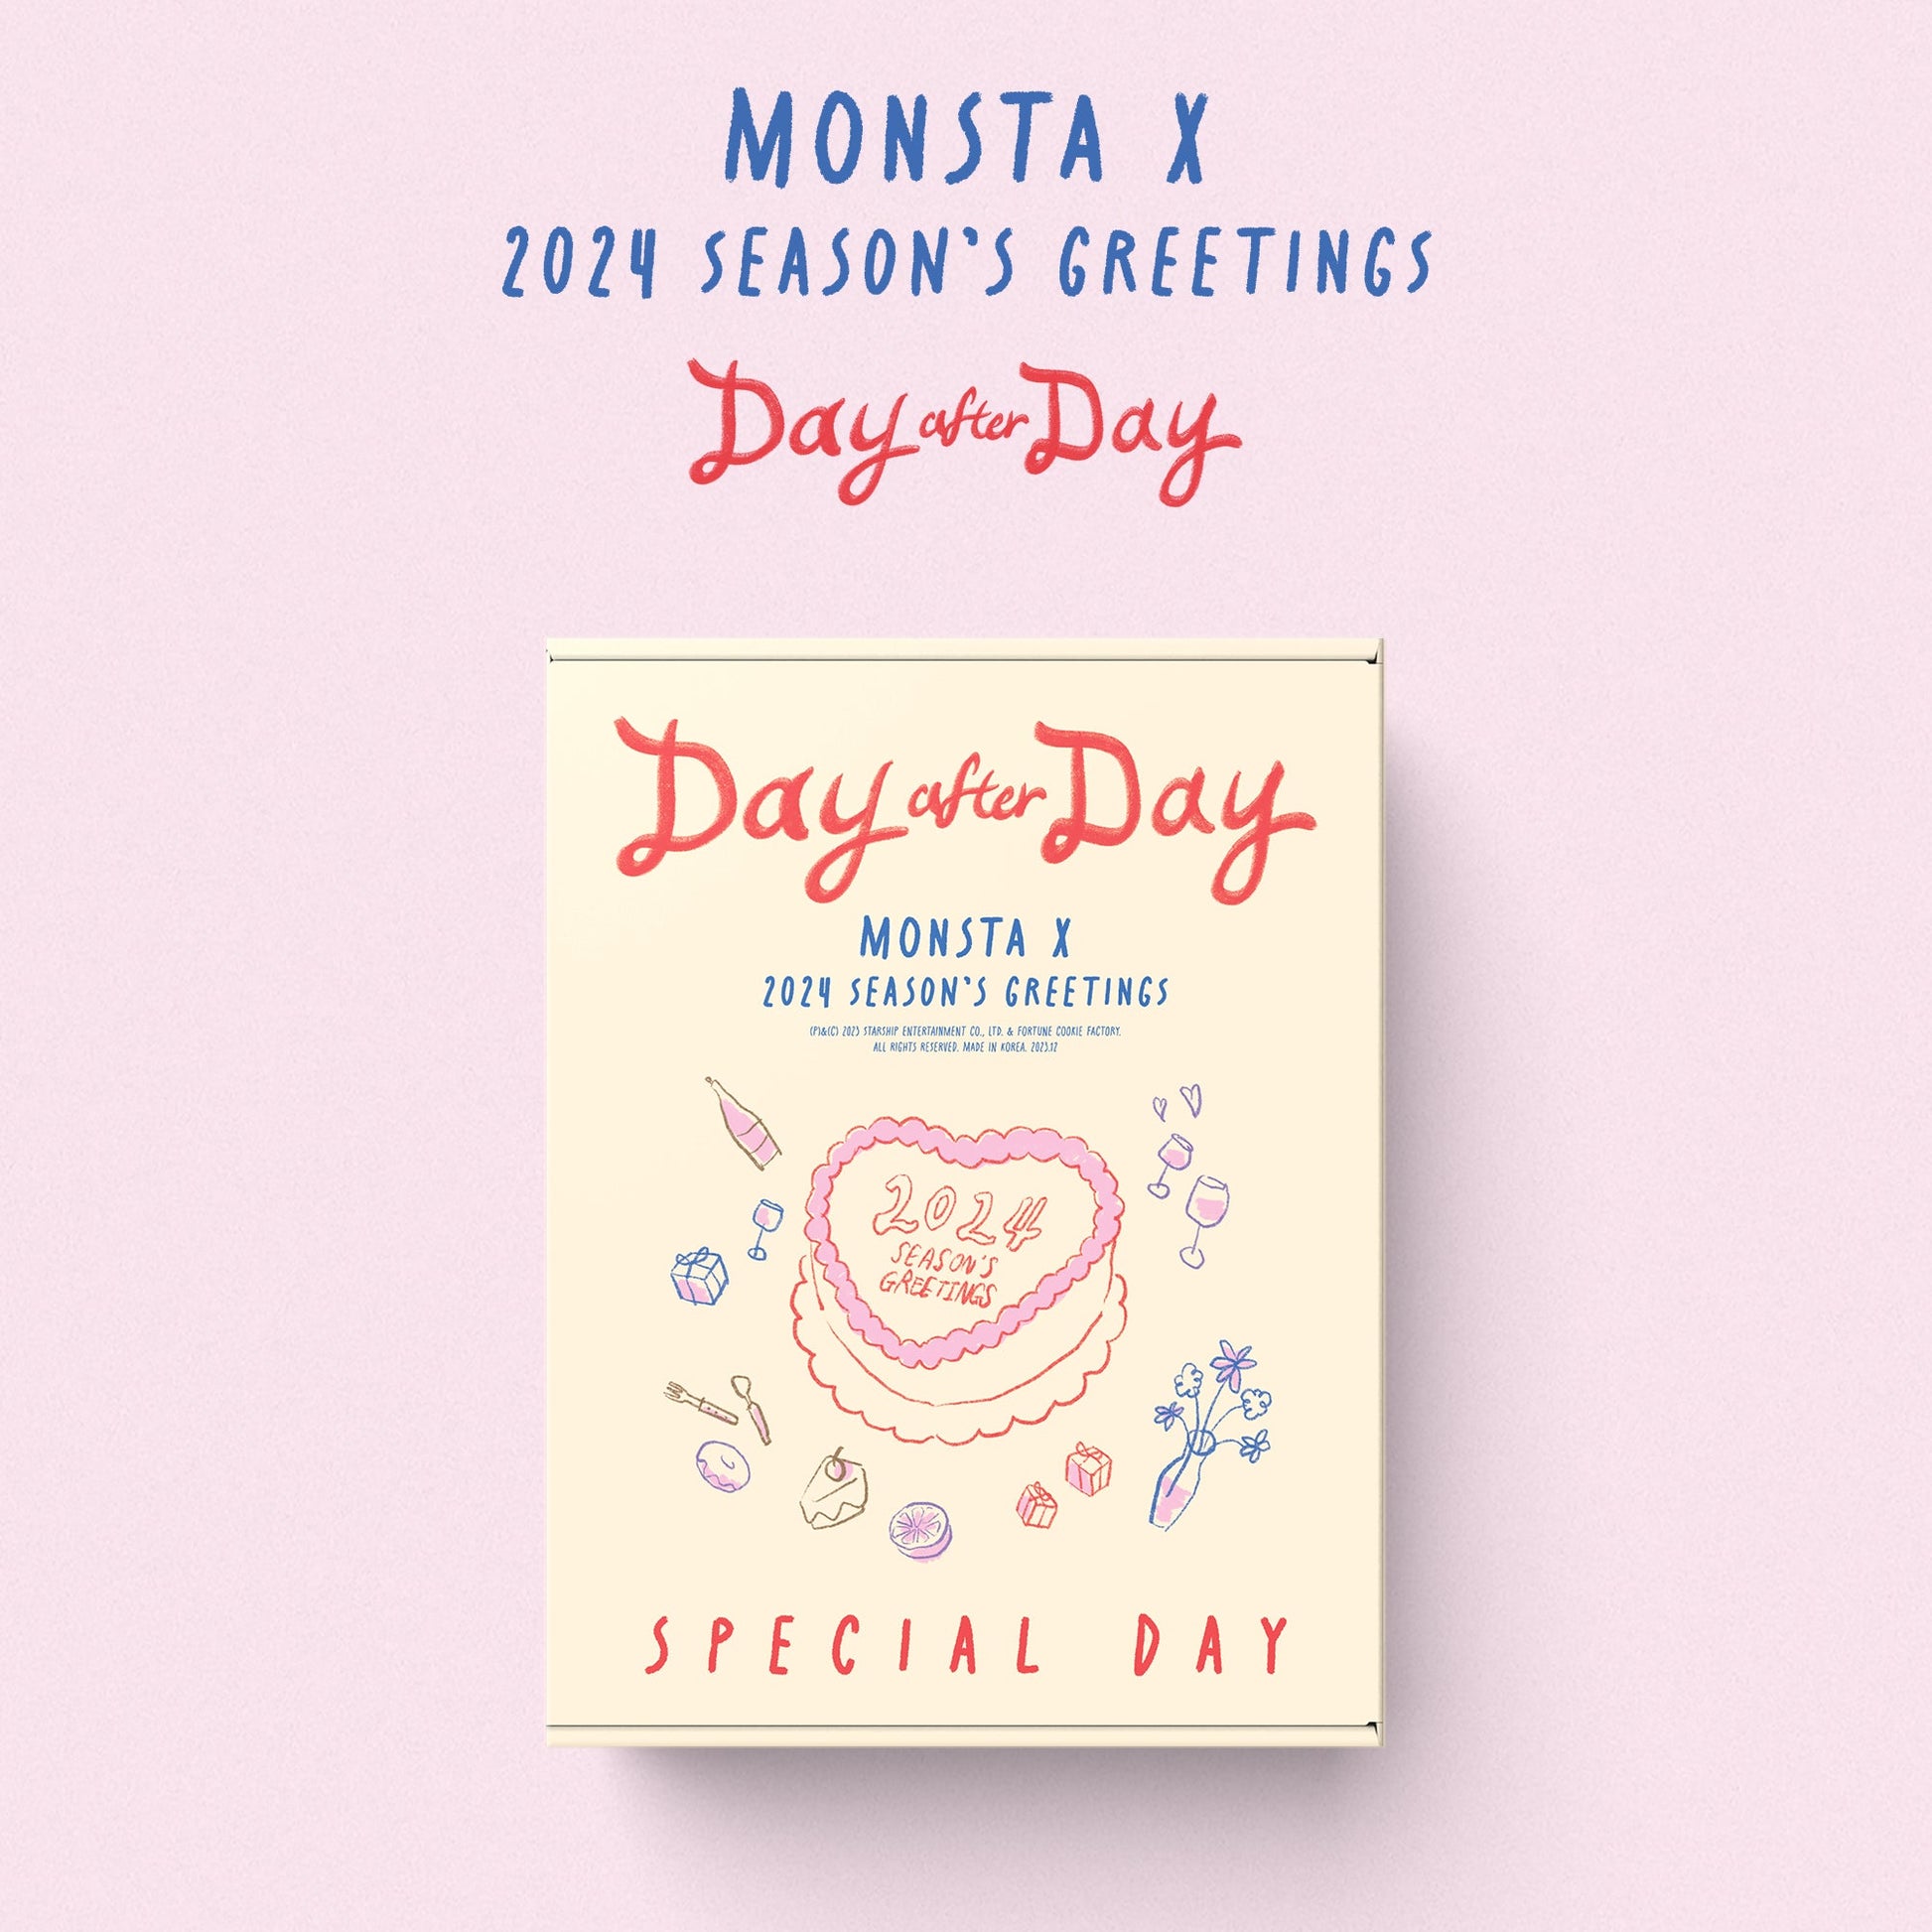 MONSTA X 2024 SEASON'S GREETINGS 'DAY AFTER DAY' SPECIAL DAY VERSION COVER